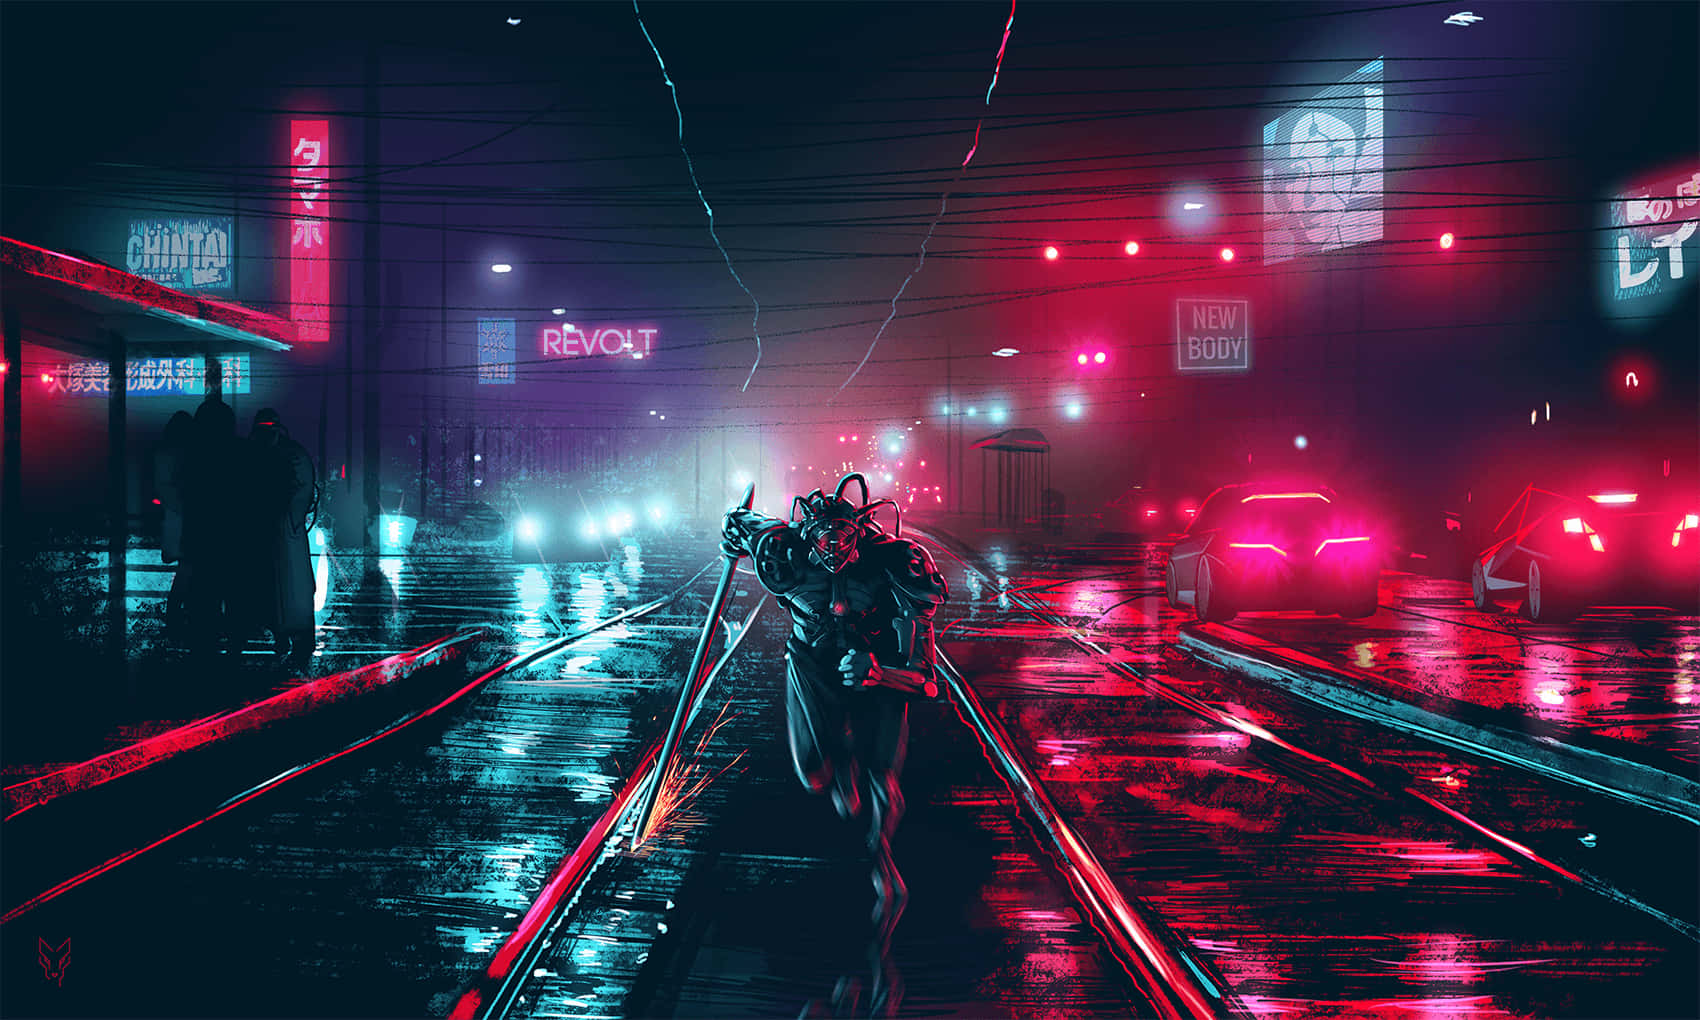 Take a magical night journey with a neon light aesthetic Wallpaper